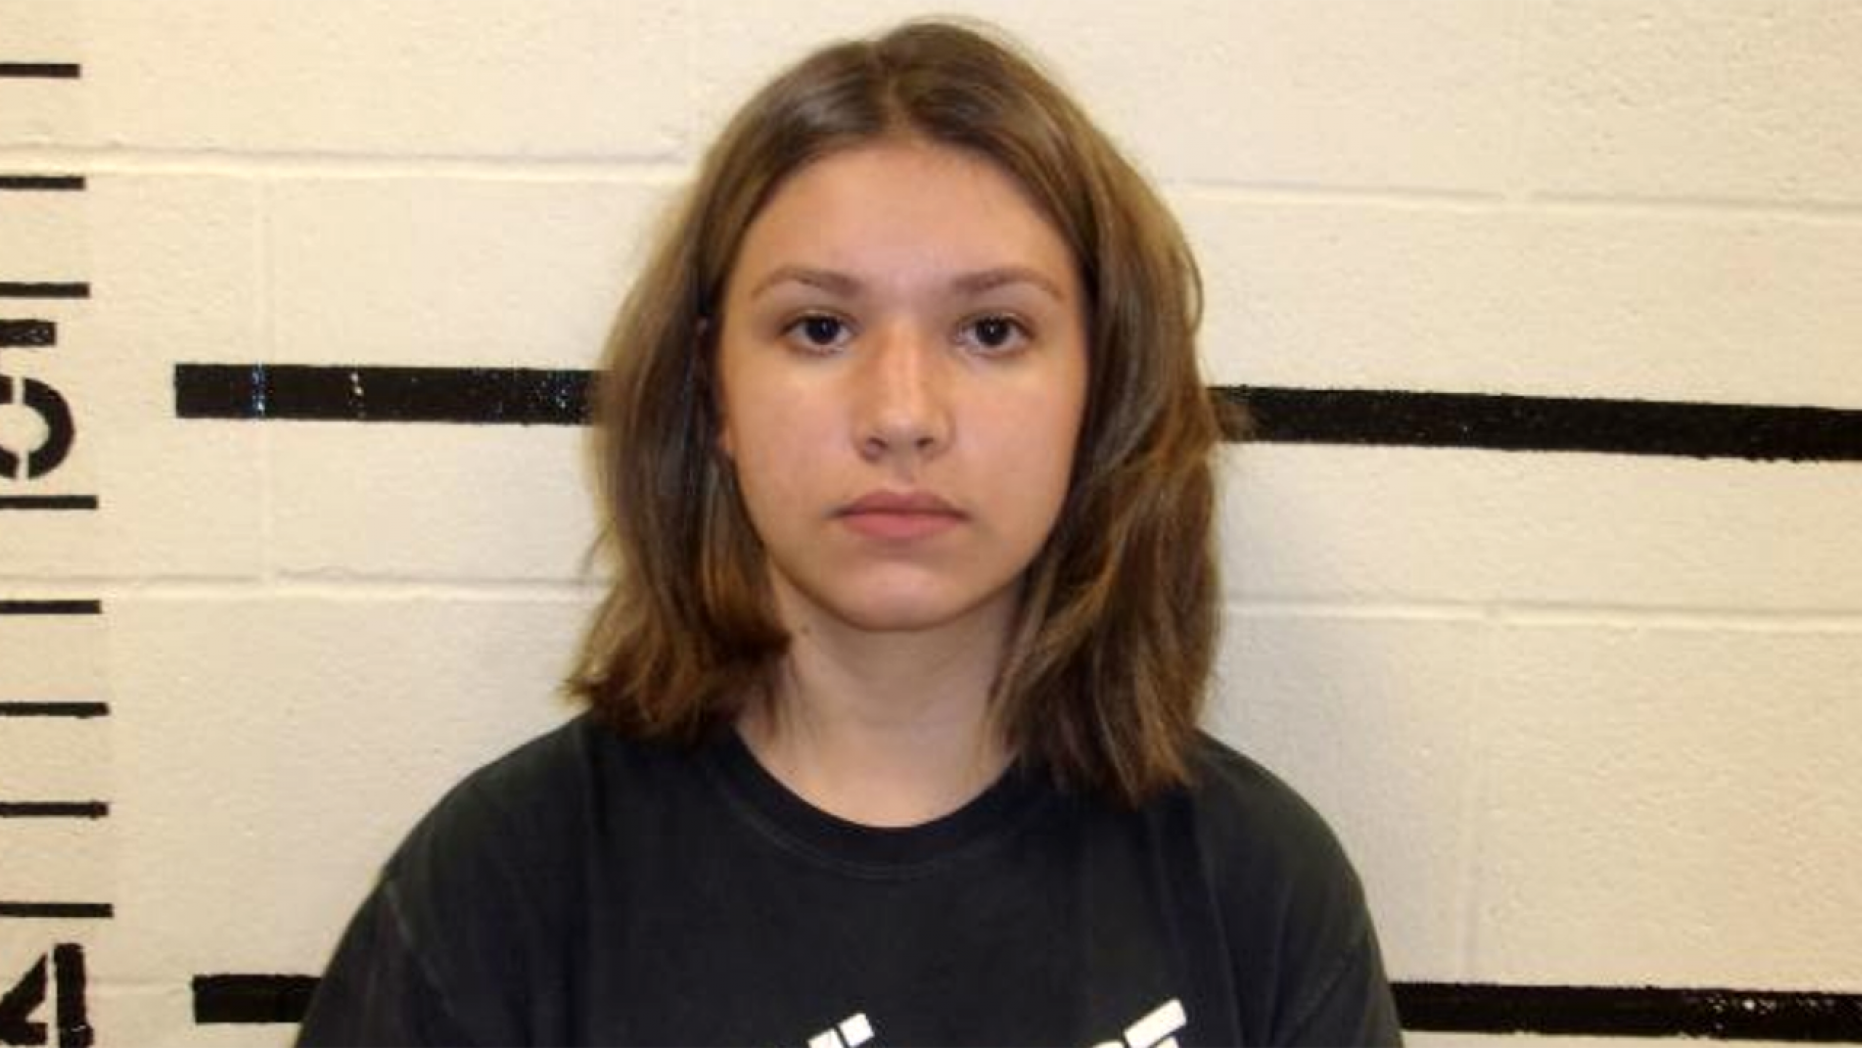 Oklahoma: 18-Year-Old Woman Alleged By "Anonymous Tip" To Have Threatened To "Shoot 400 People For Fun" With Her AK-47 At Former High School - Guns in the News